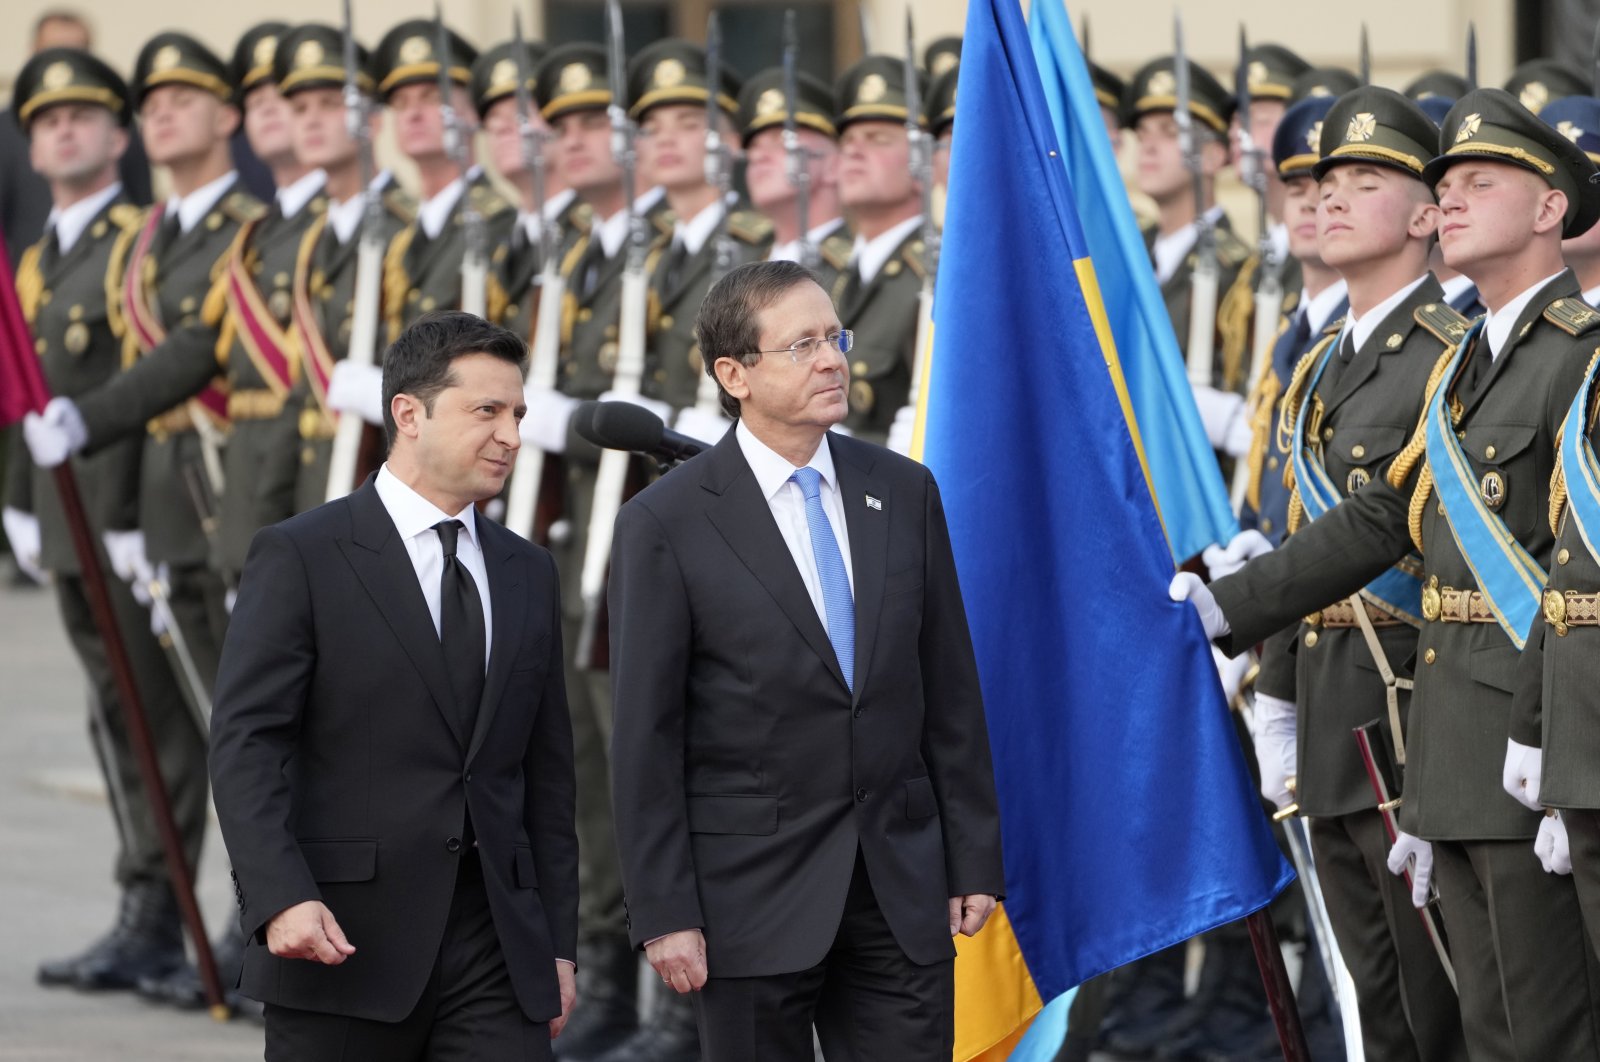 Ukrainian President Volodymyr Zelenskyy (L) and Israeli President Isaac Herzog review the honor guard during a welcome ceremony ahead of their meeting in Kyiv, Ukraine, Oct. 5, 2021. (AP File Photo)